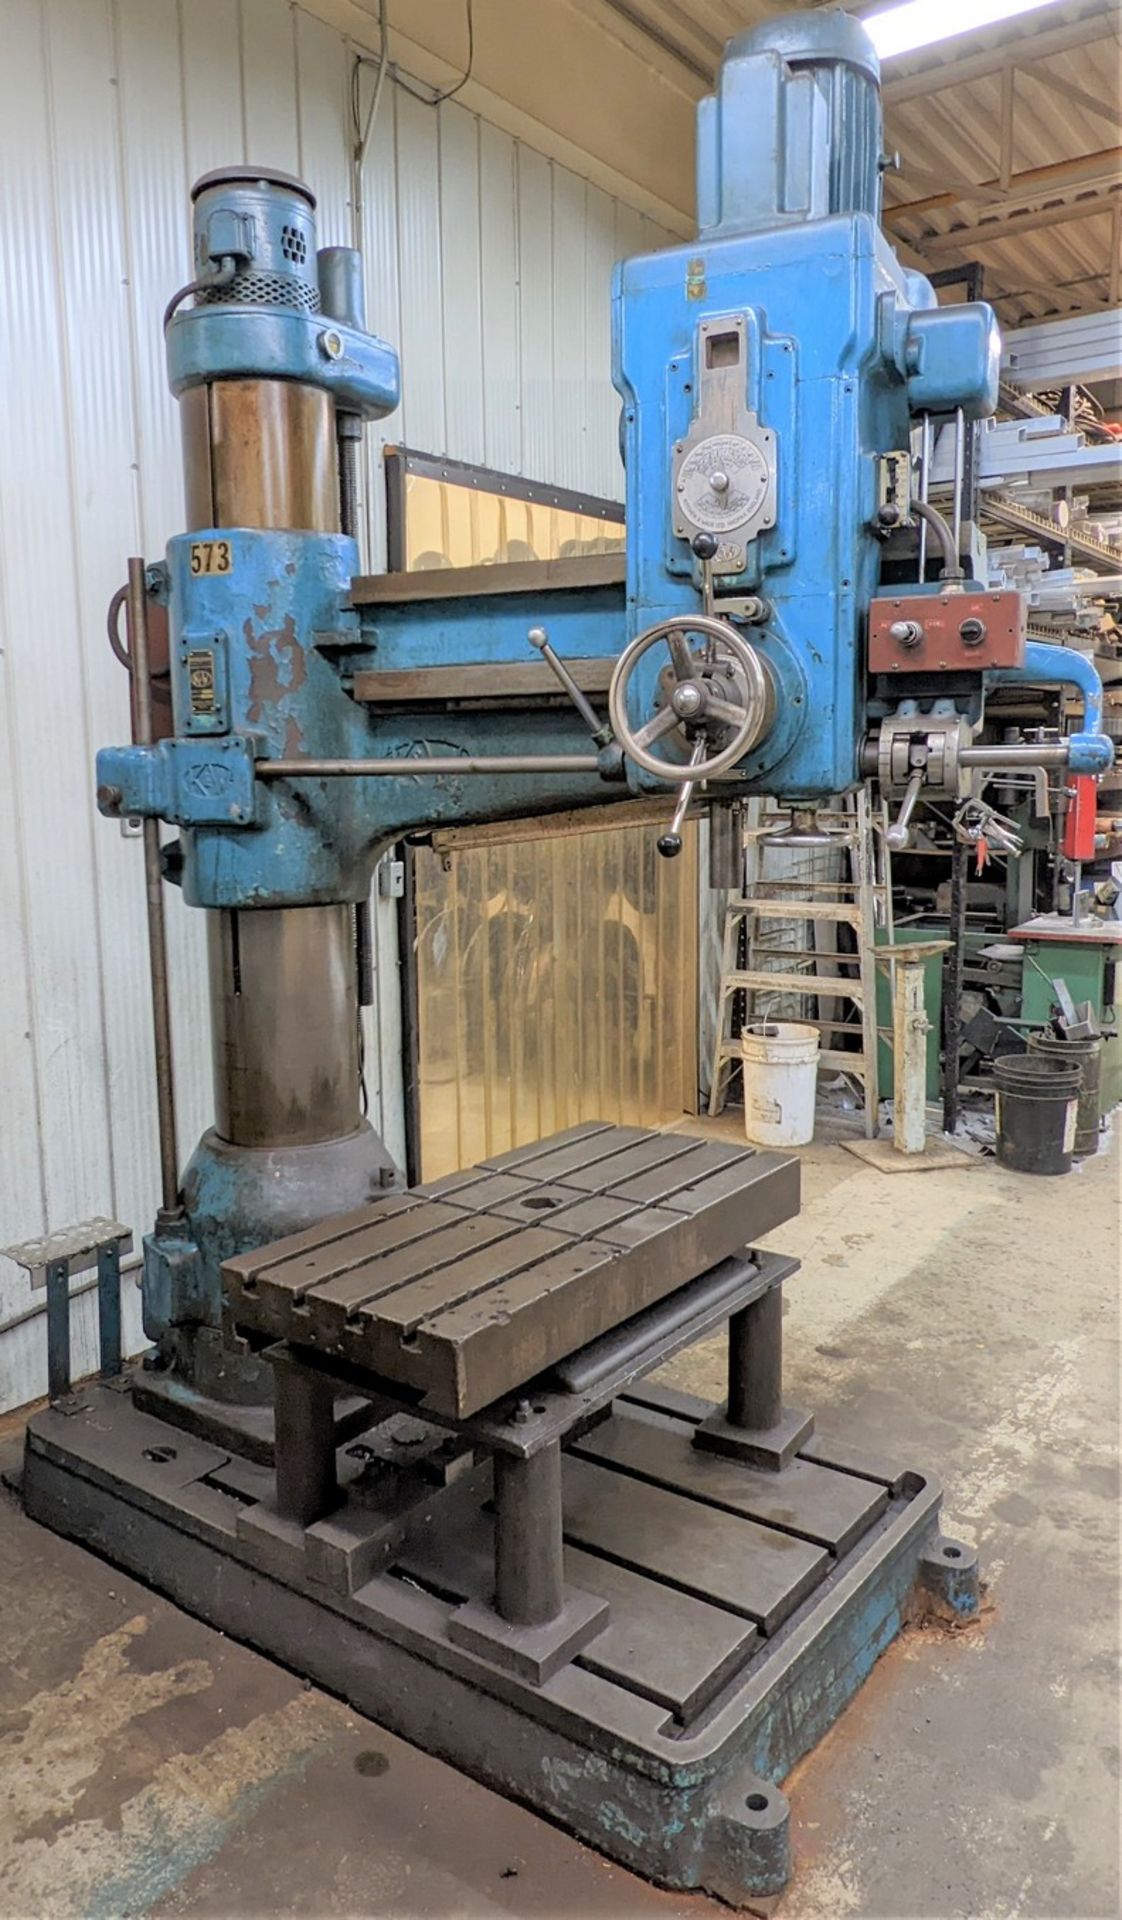 KITCHEN & WADE 36E26 RADIAL ARM DRILL, 4’ ARM, S/N 17963 W/ BOX TABLE